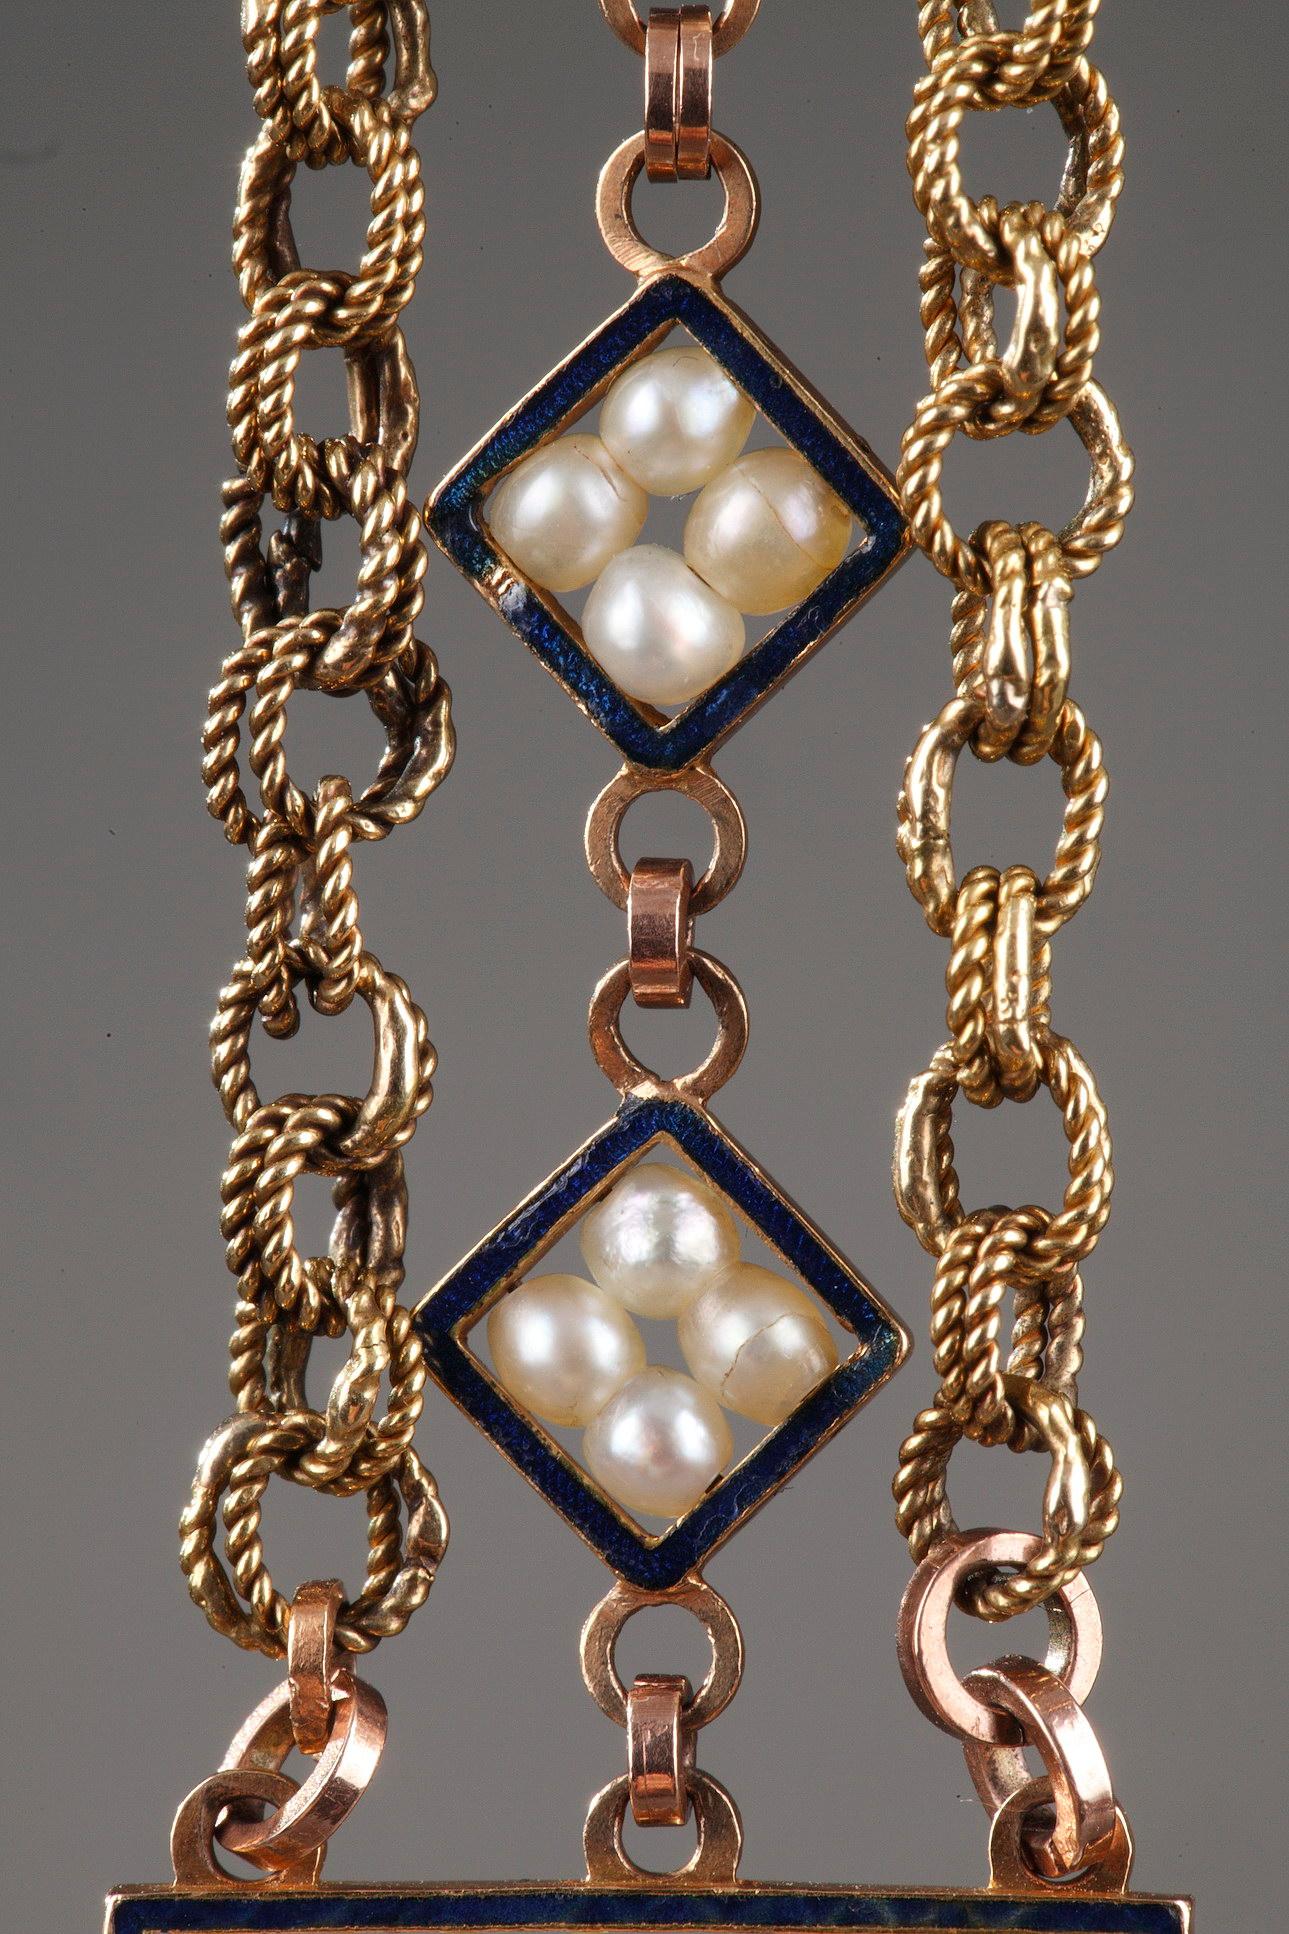 Chatelaine with Gold, Enamel and Pearls, Late 18th Century Work For Sale 5